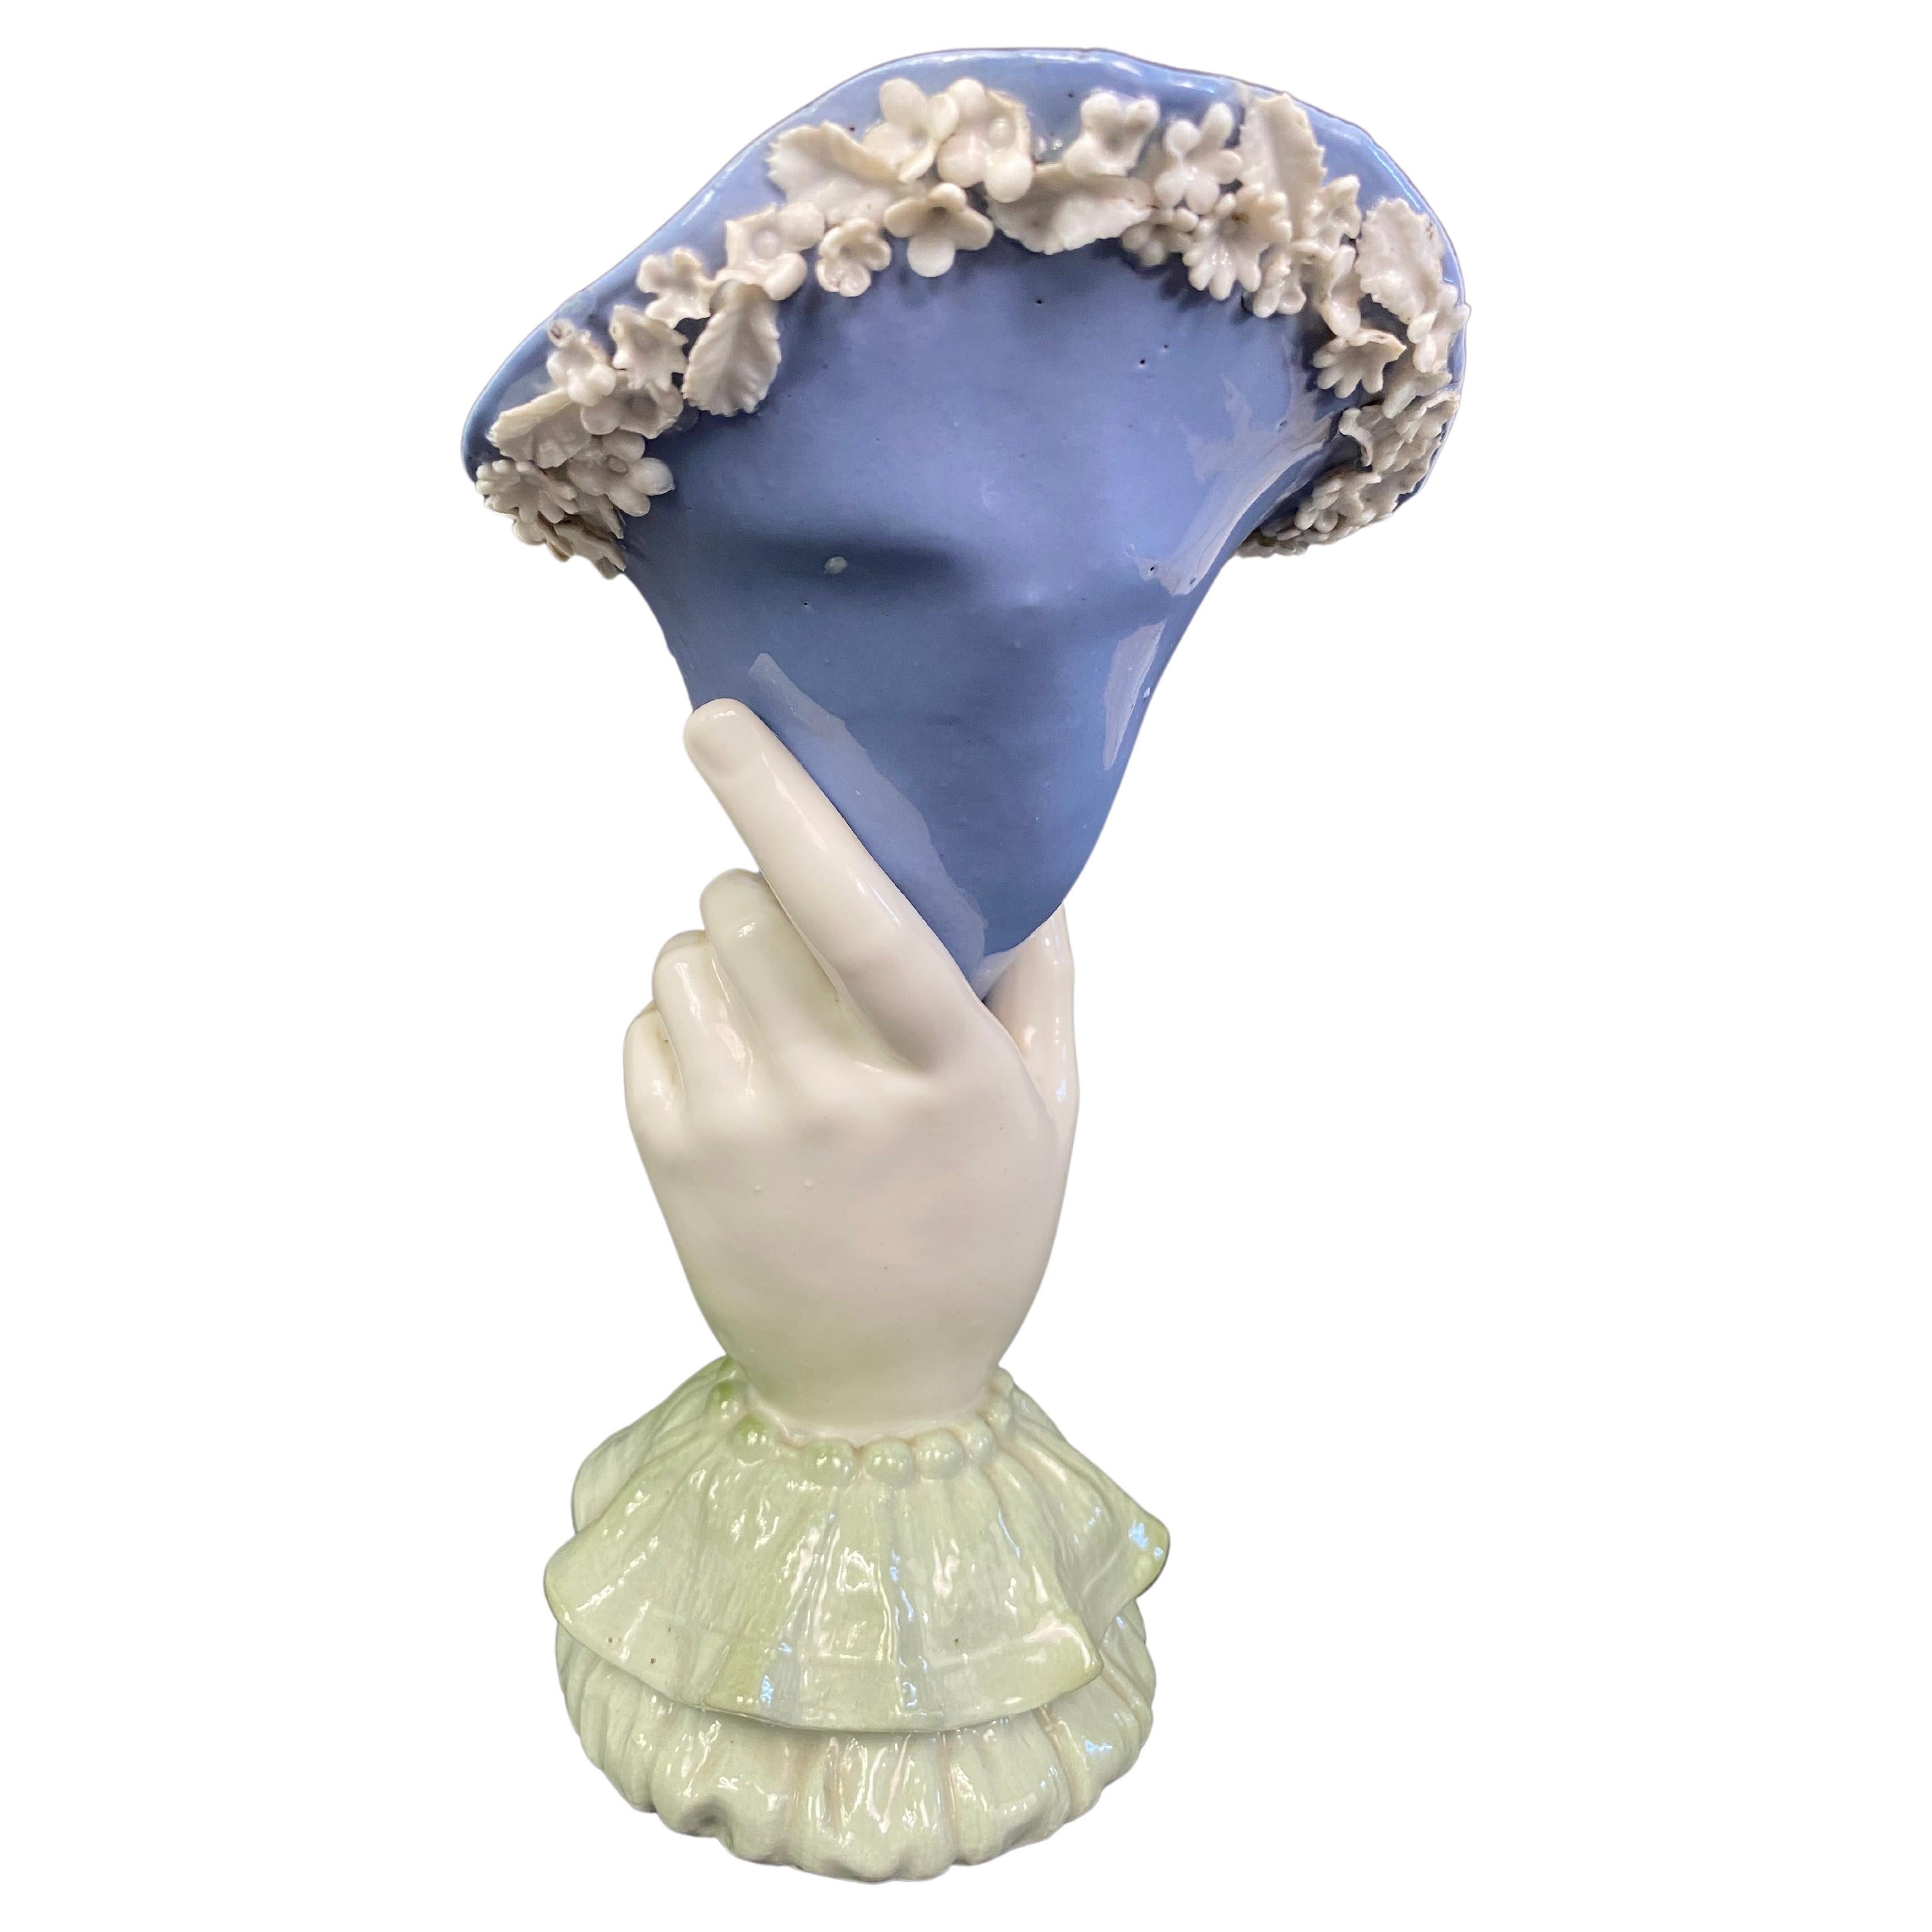 “Cornet” vase or “Main” vase late 19th century - early 20th century
Art Nouveau purple porcelain vase, representing a hand holding a cornucopia, white enameled flower cone
The opening is wavy and well flared.
The base represents the cuff of a lace